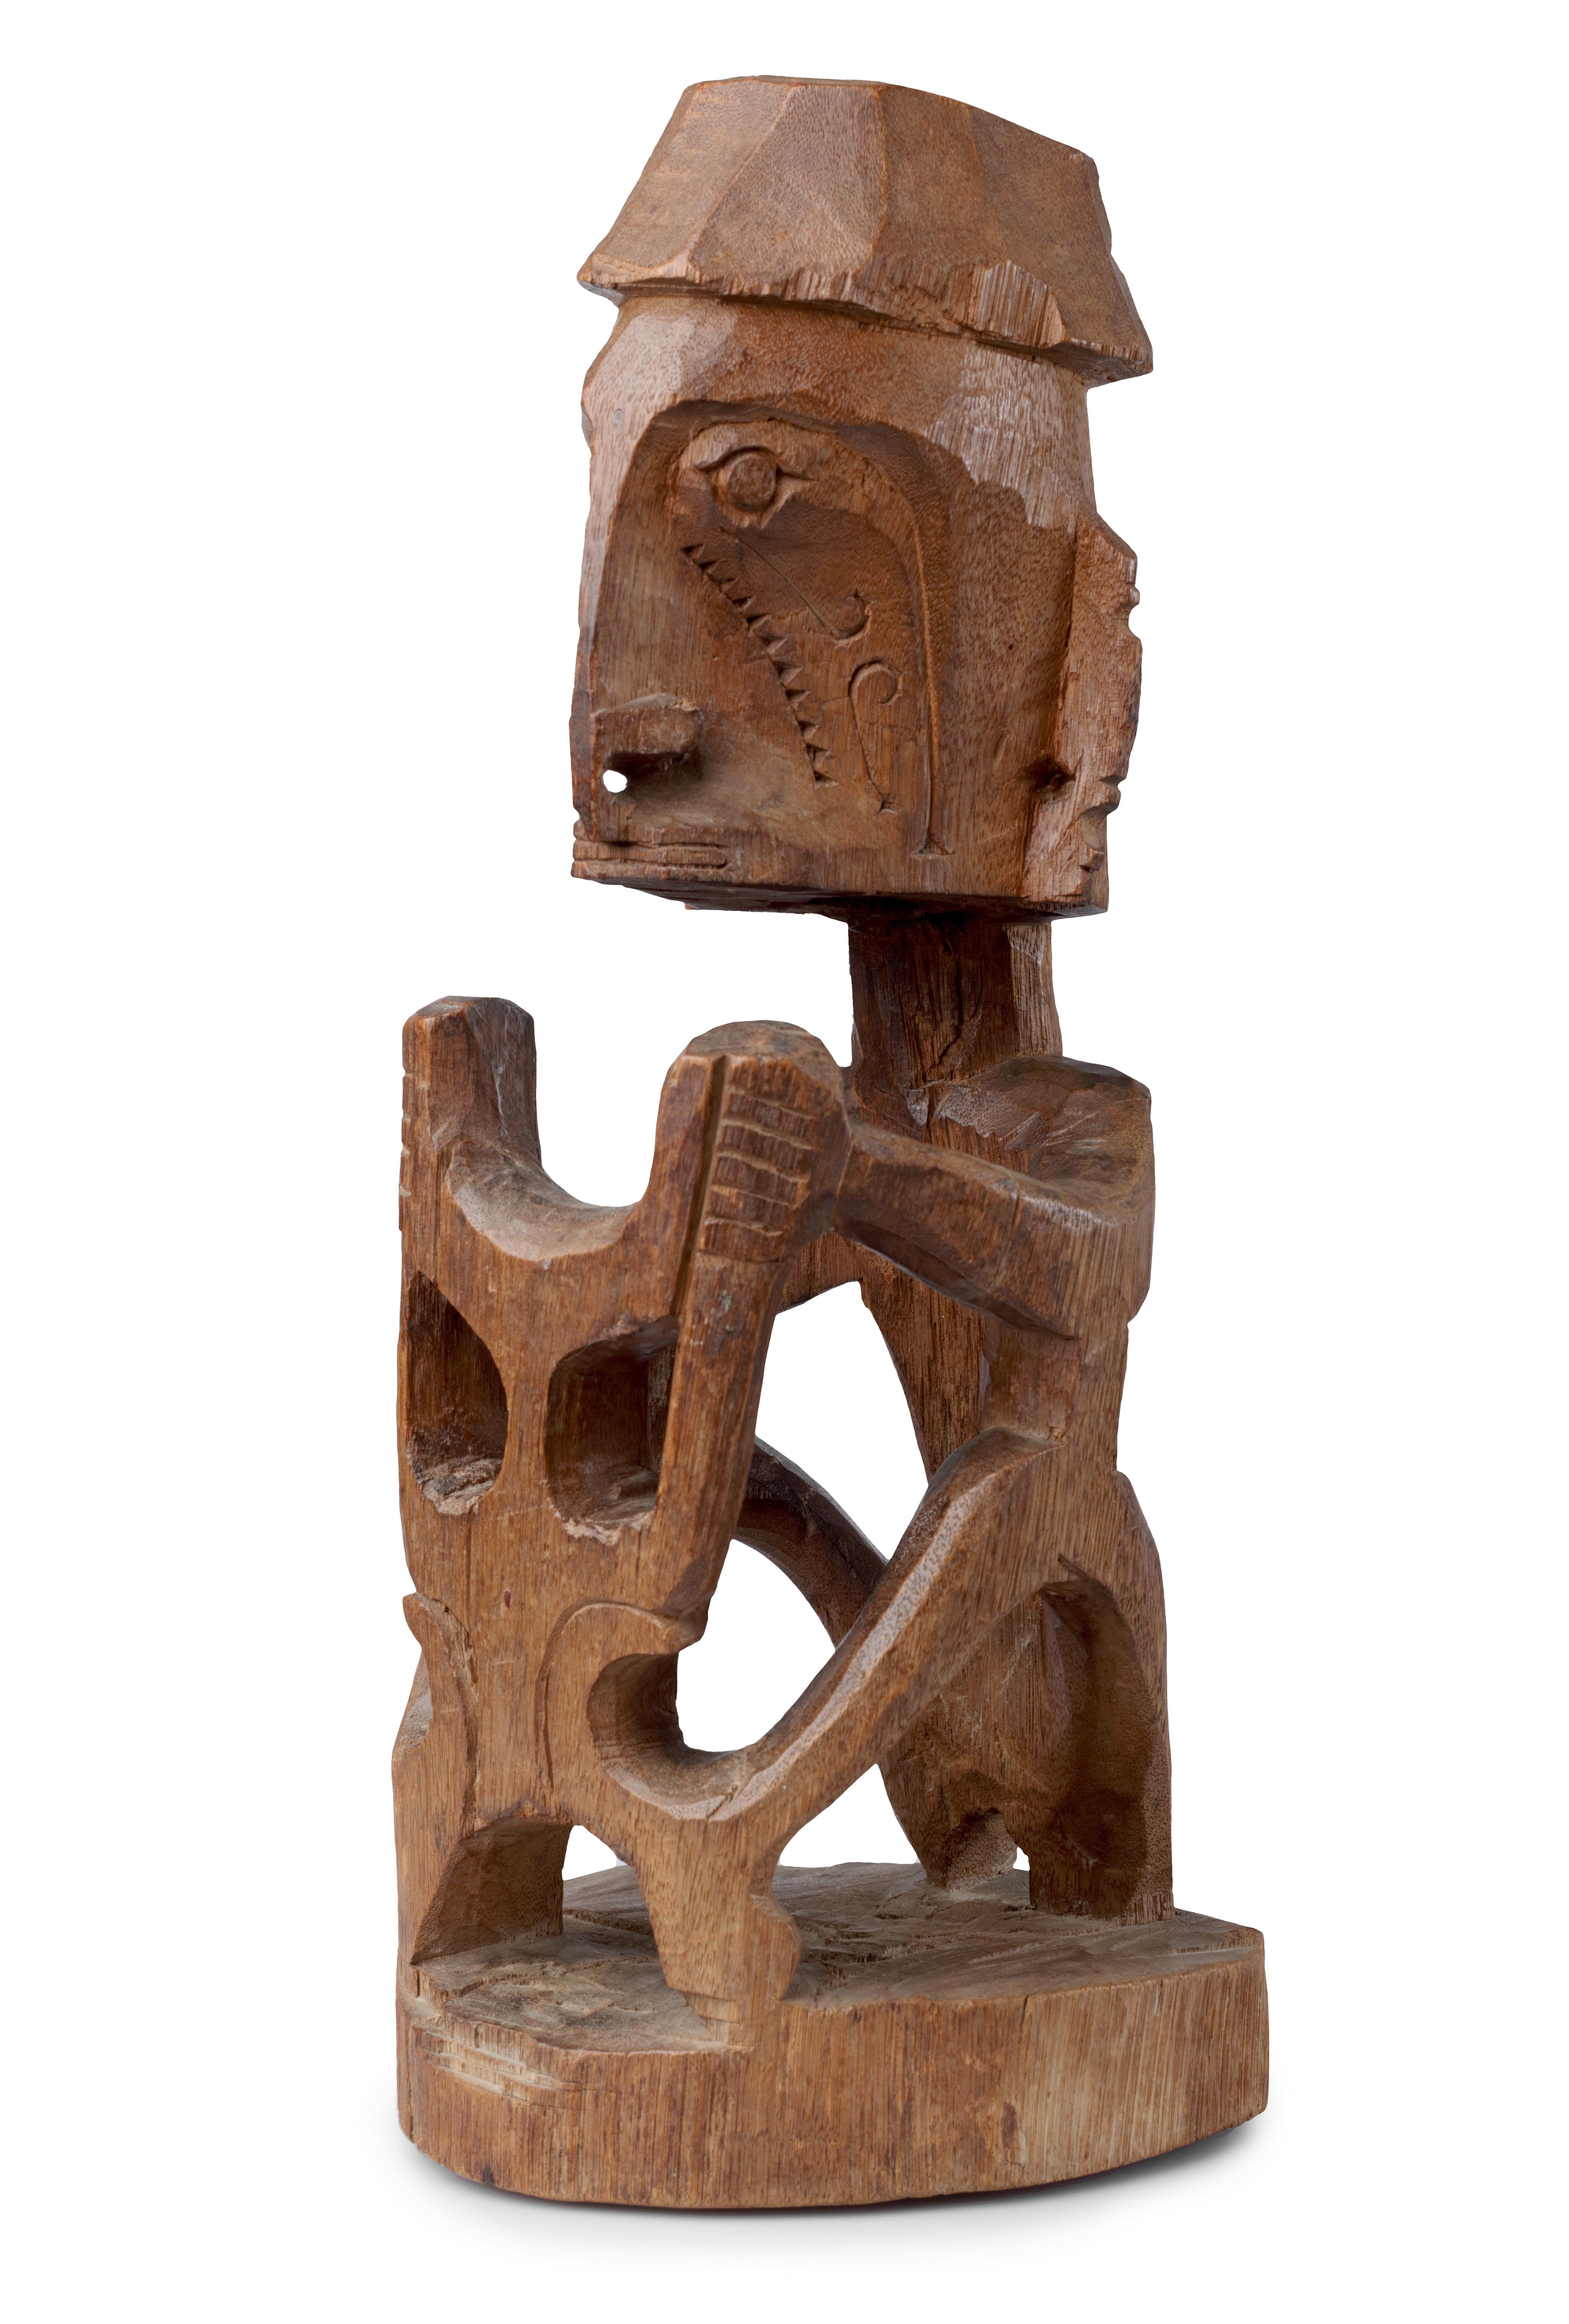 A Papua wood figure of a Korwar

North West Irian Jaya, Vogelkop area, coastal Geelvink Bay, present-day Cenderawasih Bay, early 20th century

The seated Korwar is holding an openwork “shield” in front of him, with a dark brown soft gloss